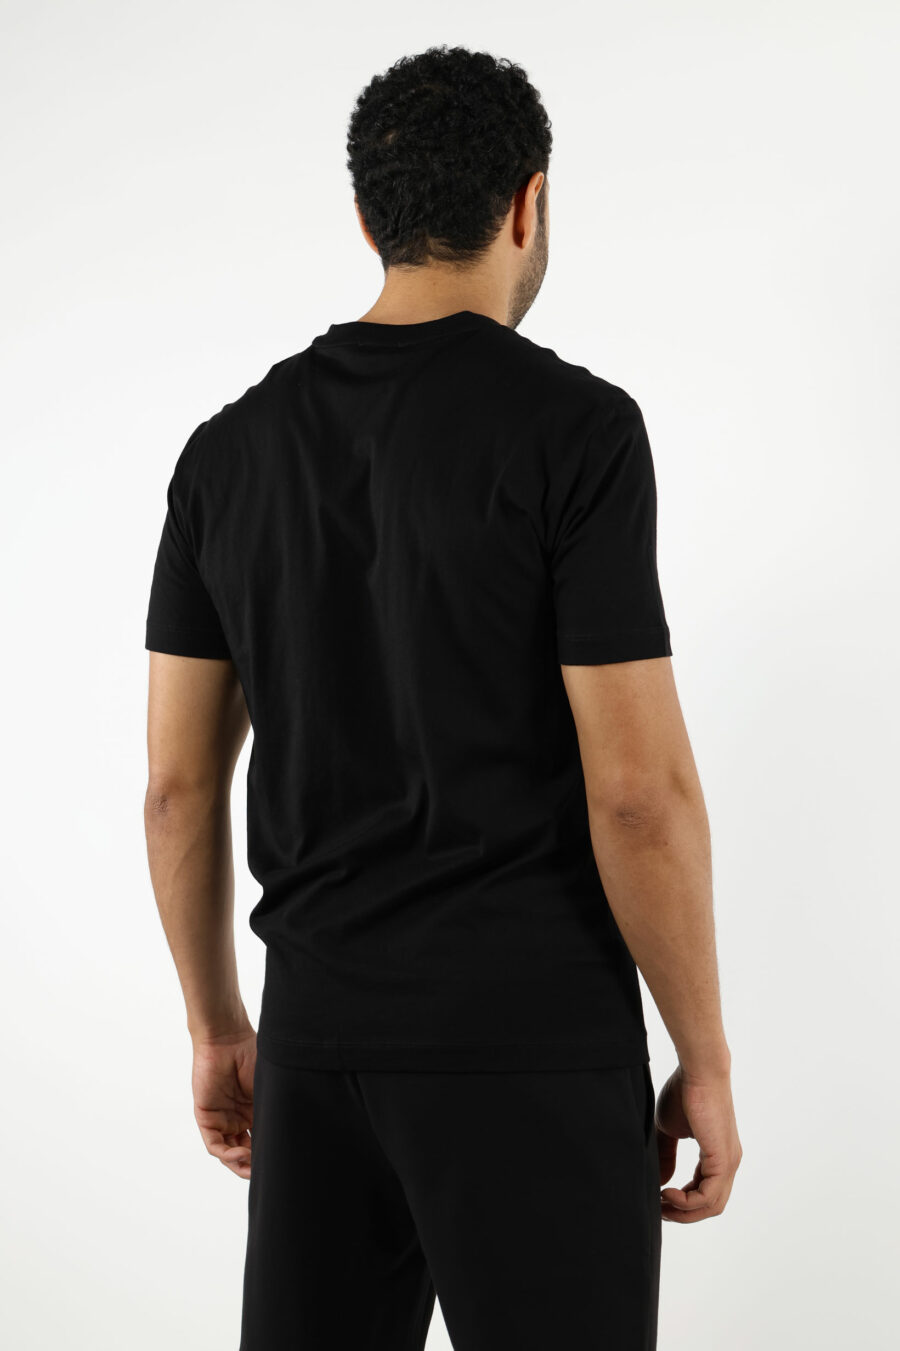 Black T-shirt with "lux identity" maxilogo in gradient - 110865